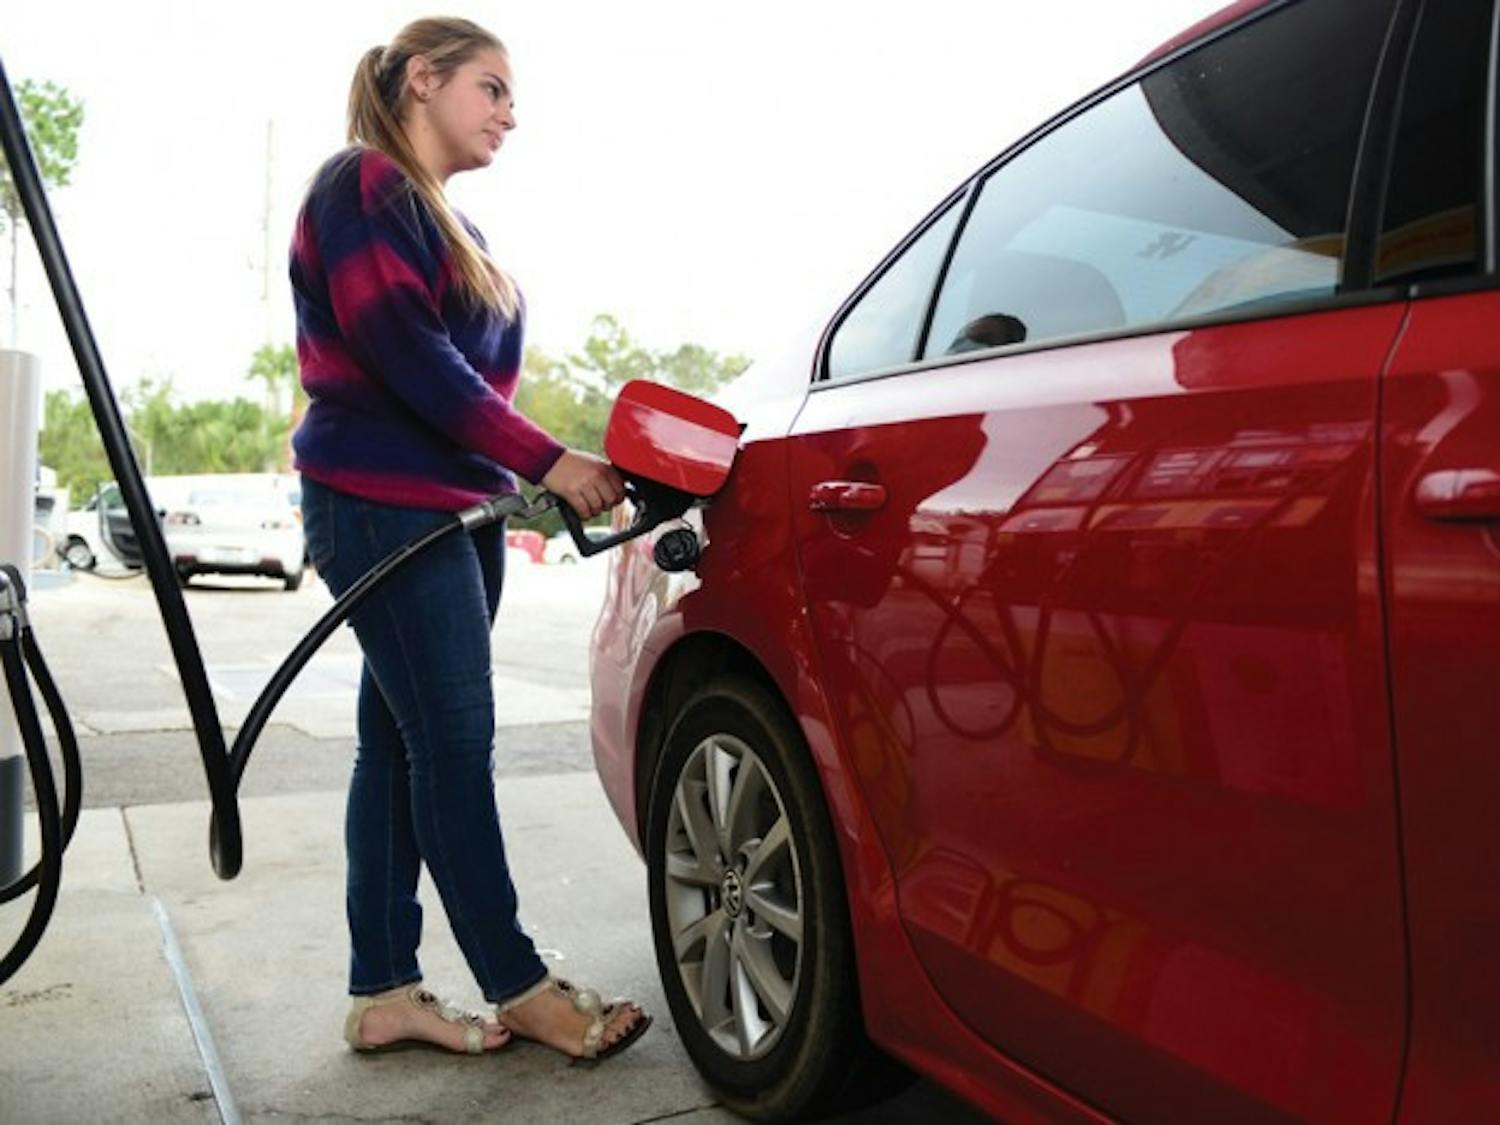 Chantelle Melendez, a 20-year-old psychology junior, pumps gas Tuesday at the Shell station at 3330 SW Archer Road. The average gas price in Florida is $3.43, said Gregg Laskoski, senior petroleum analyst for GasBuddy.com.